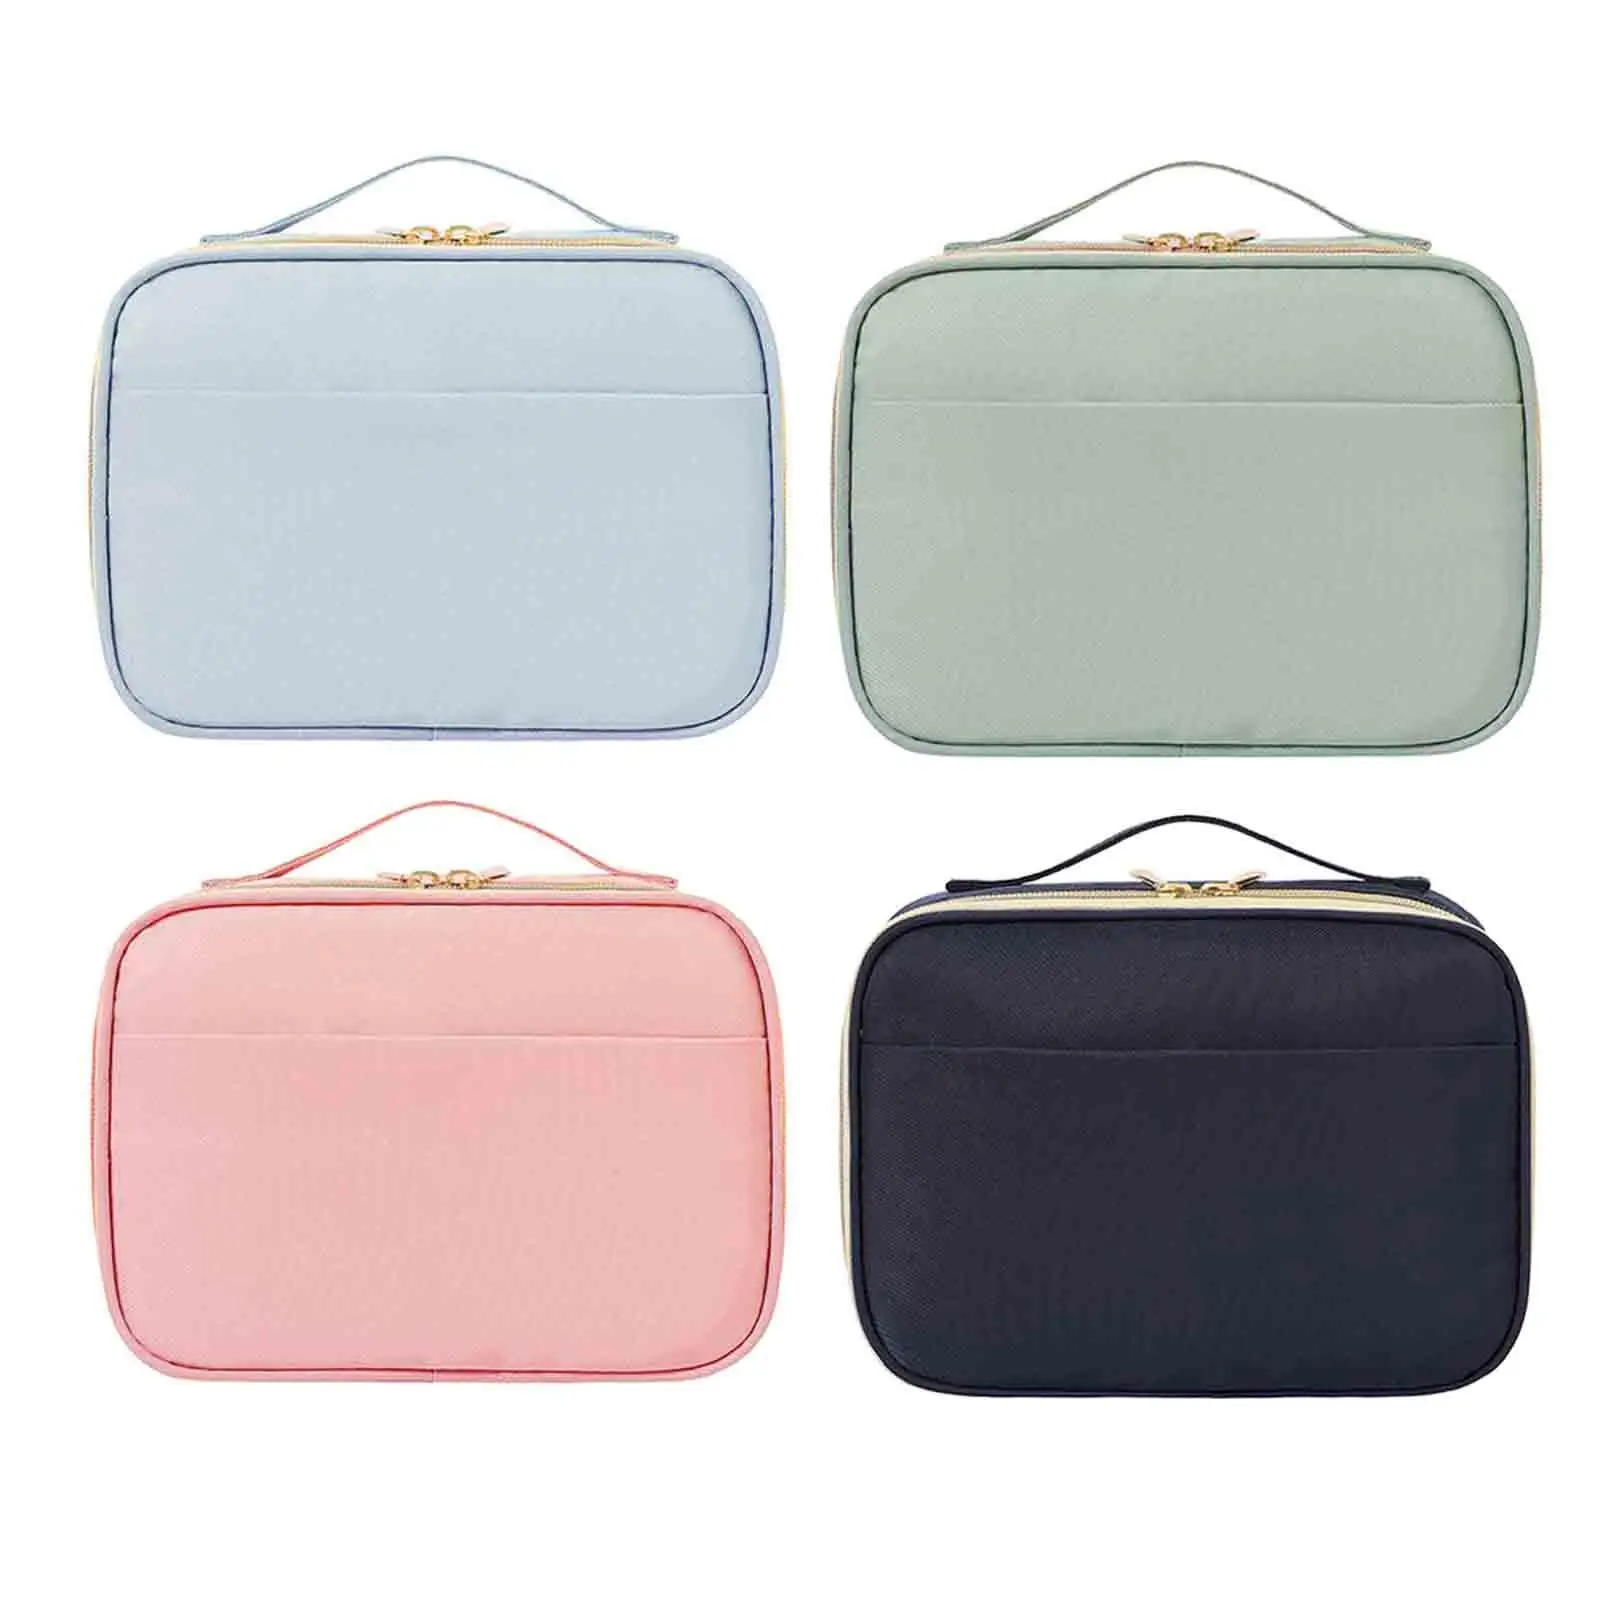 2 in 1 Makeup Bag Fashionable Makeup Tools Brushes Container Stylish Hygiene Bag Travel Toiletry Bag for Bathroom Women Girls